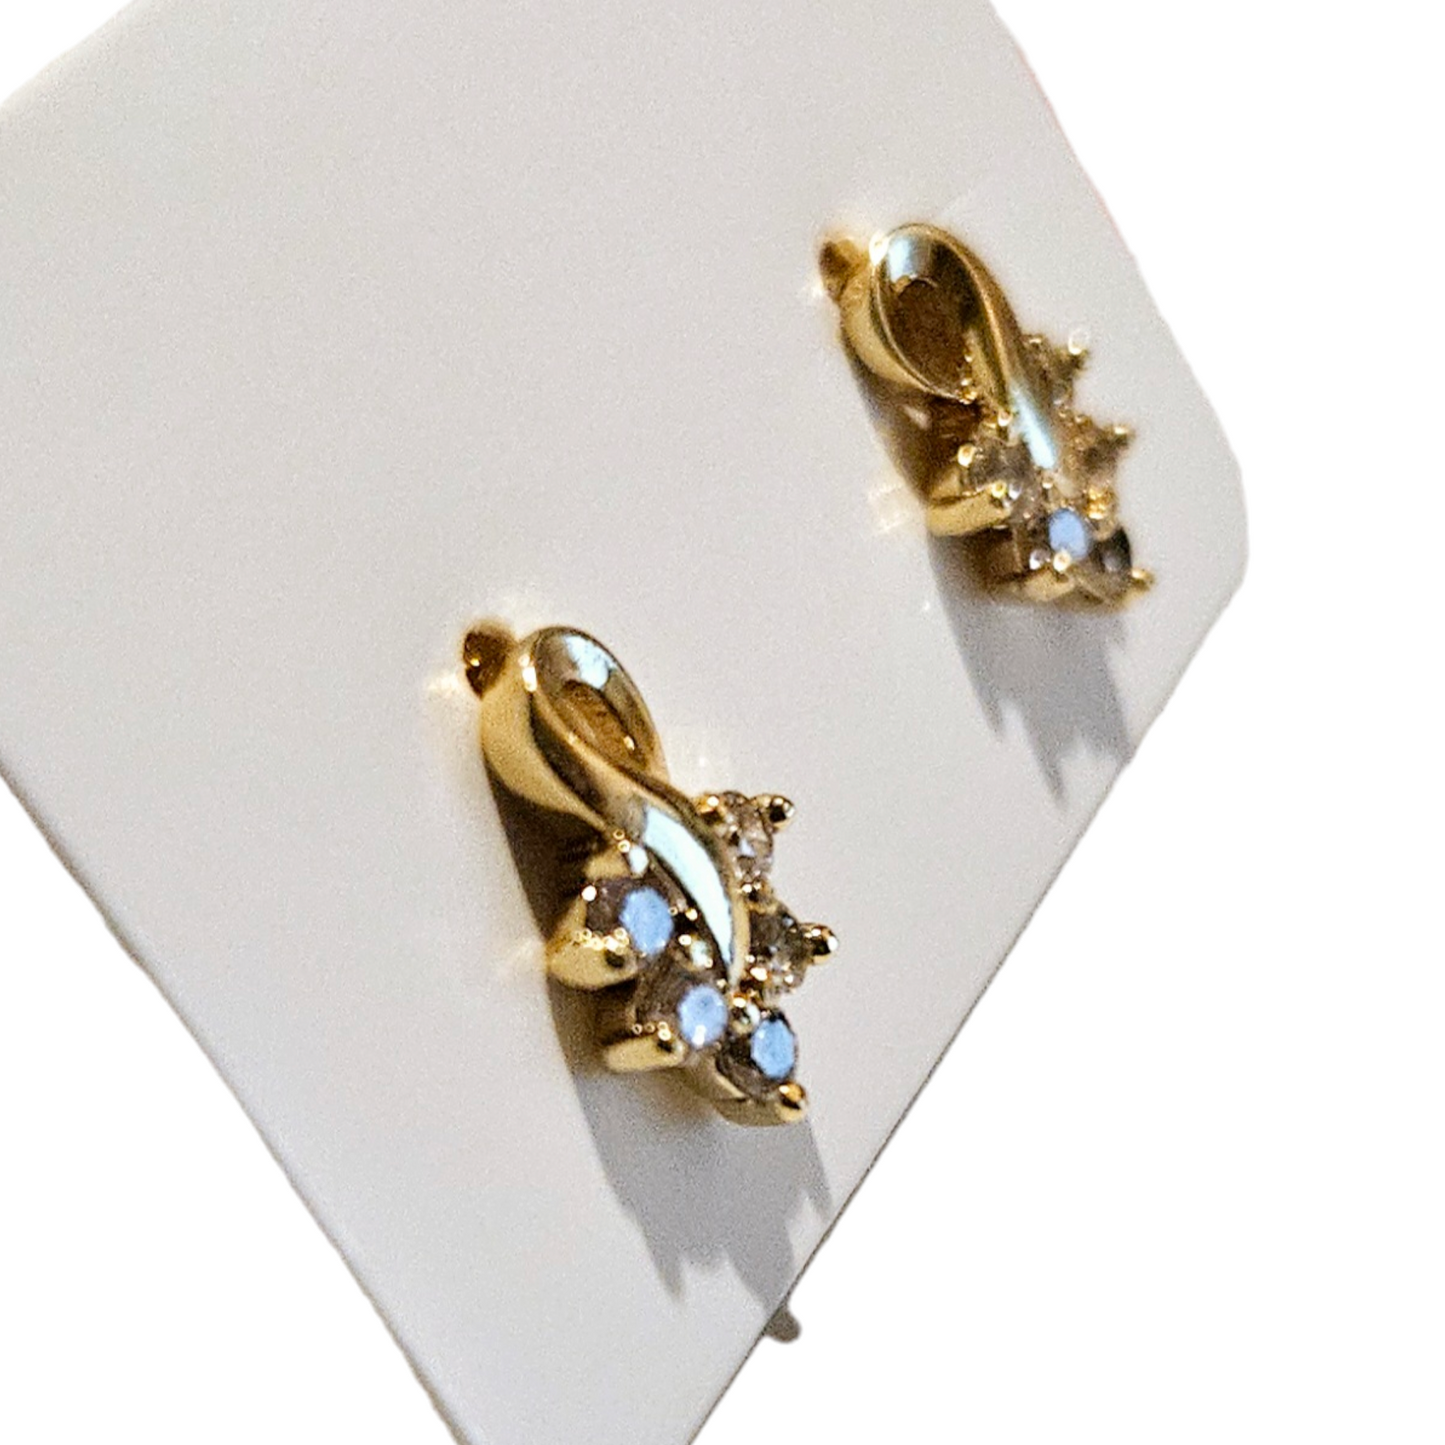 Leave Design and White CZ 14k Gold Plated Stud Earrings